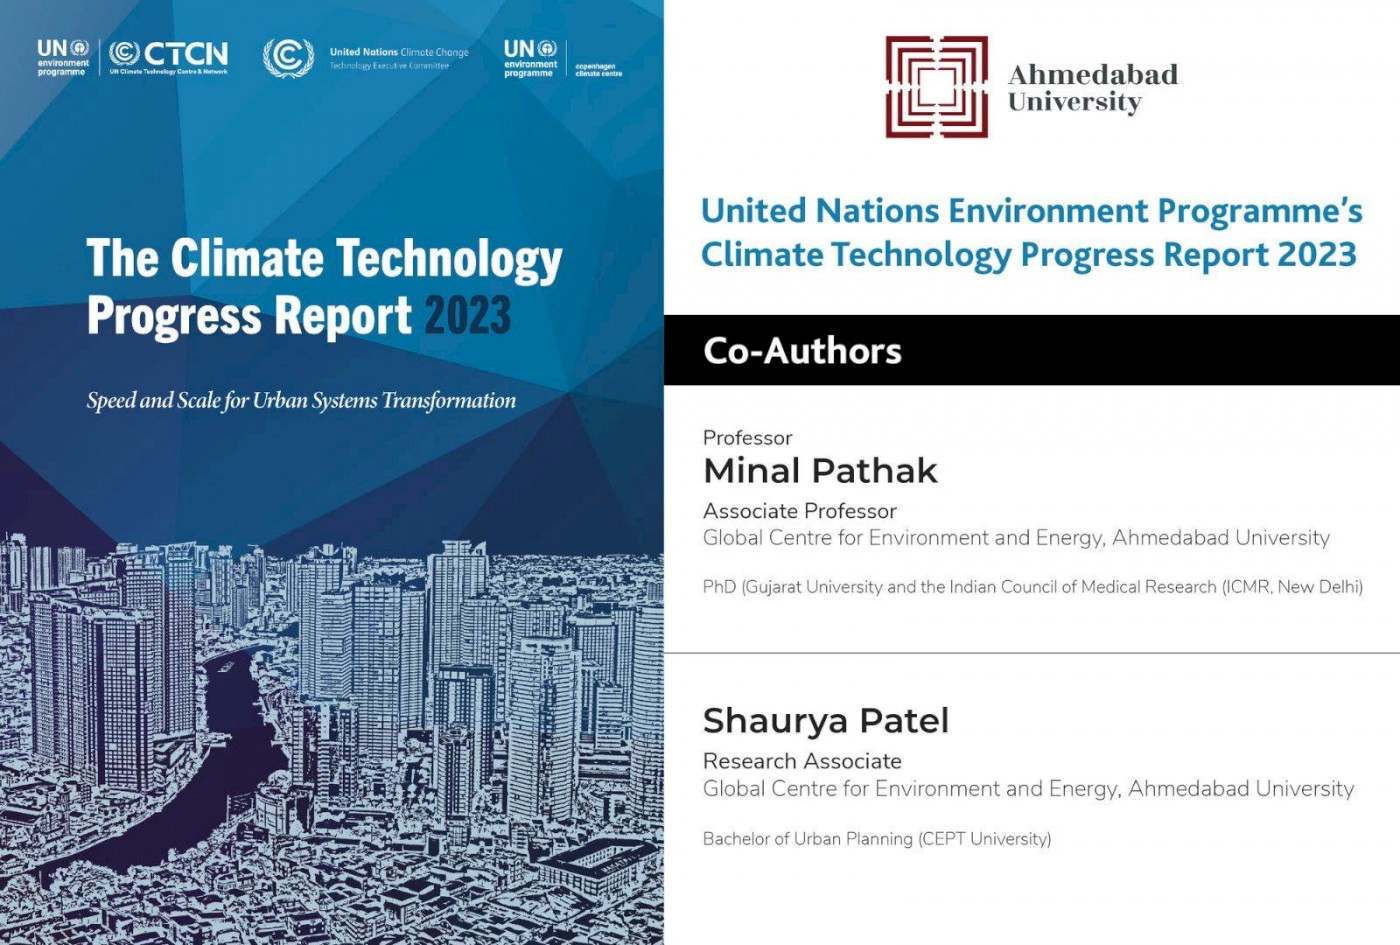 Contribution of Global Centre for Environment and Energy in the UNEP Climate Technology Progress Report 2023